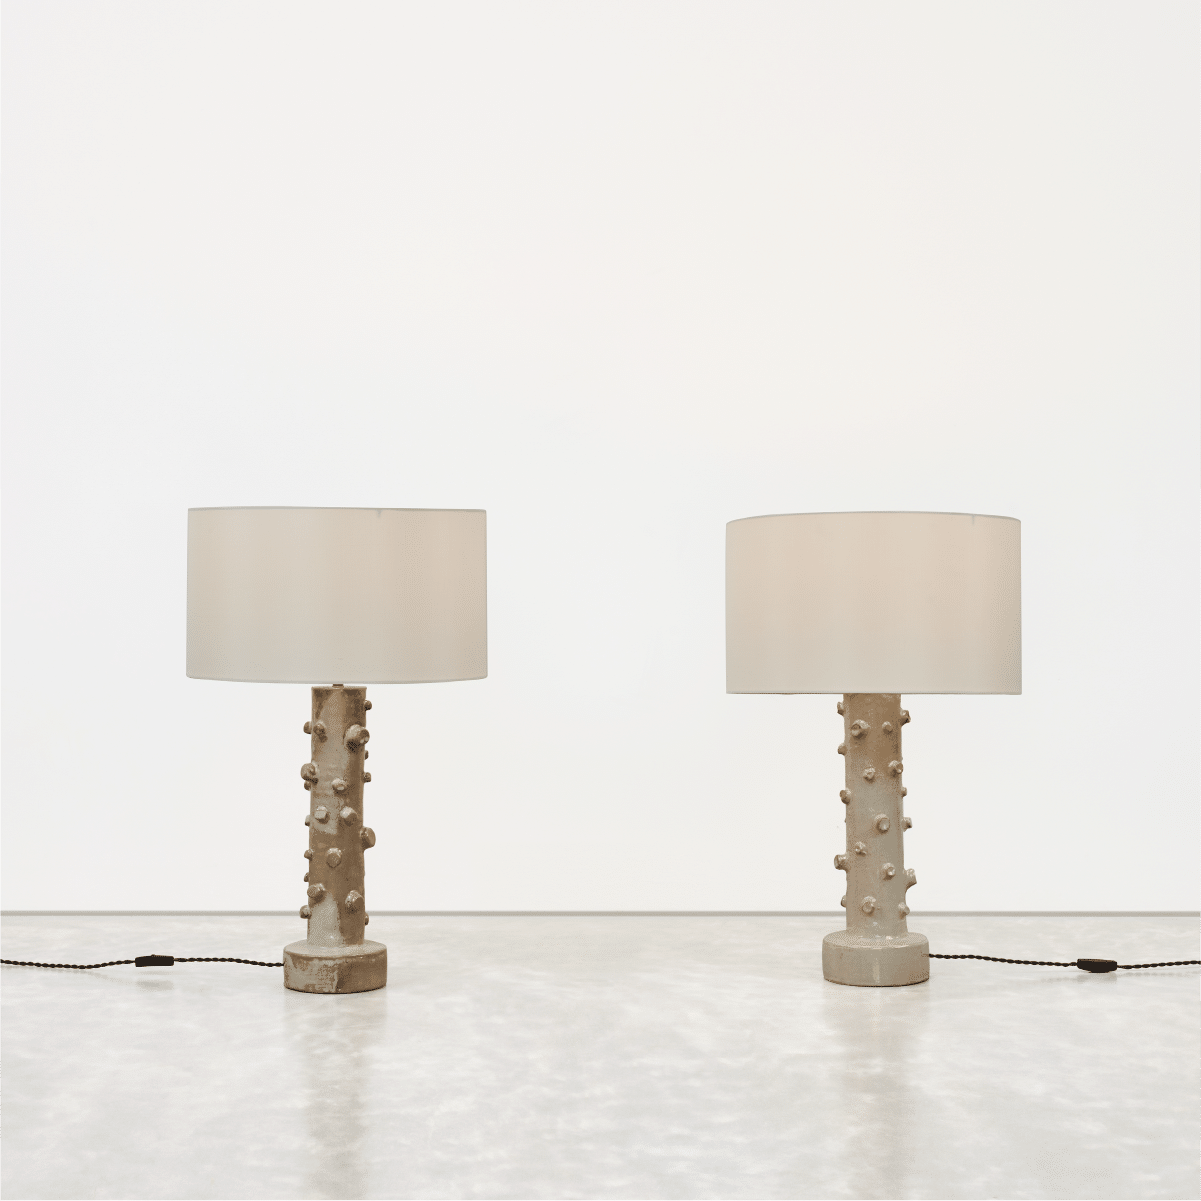 Low res for web_Pair of Corallo Table Lamps-